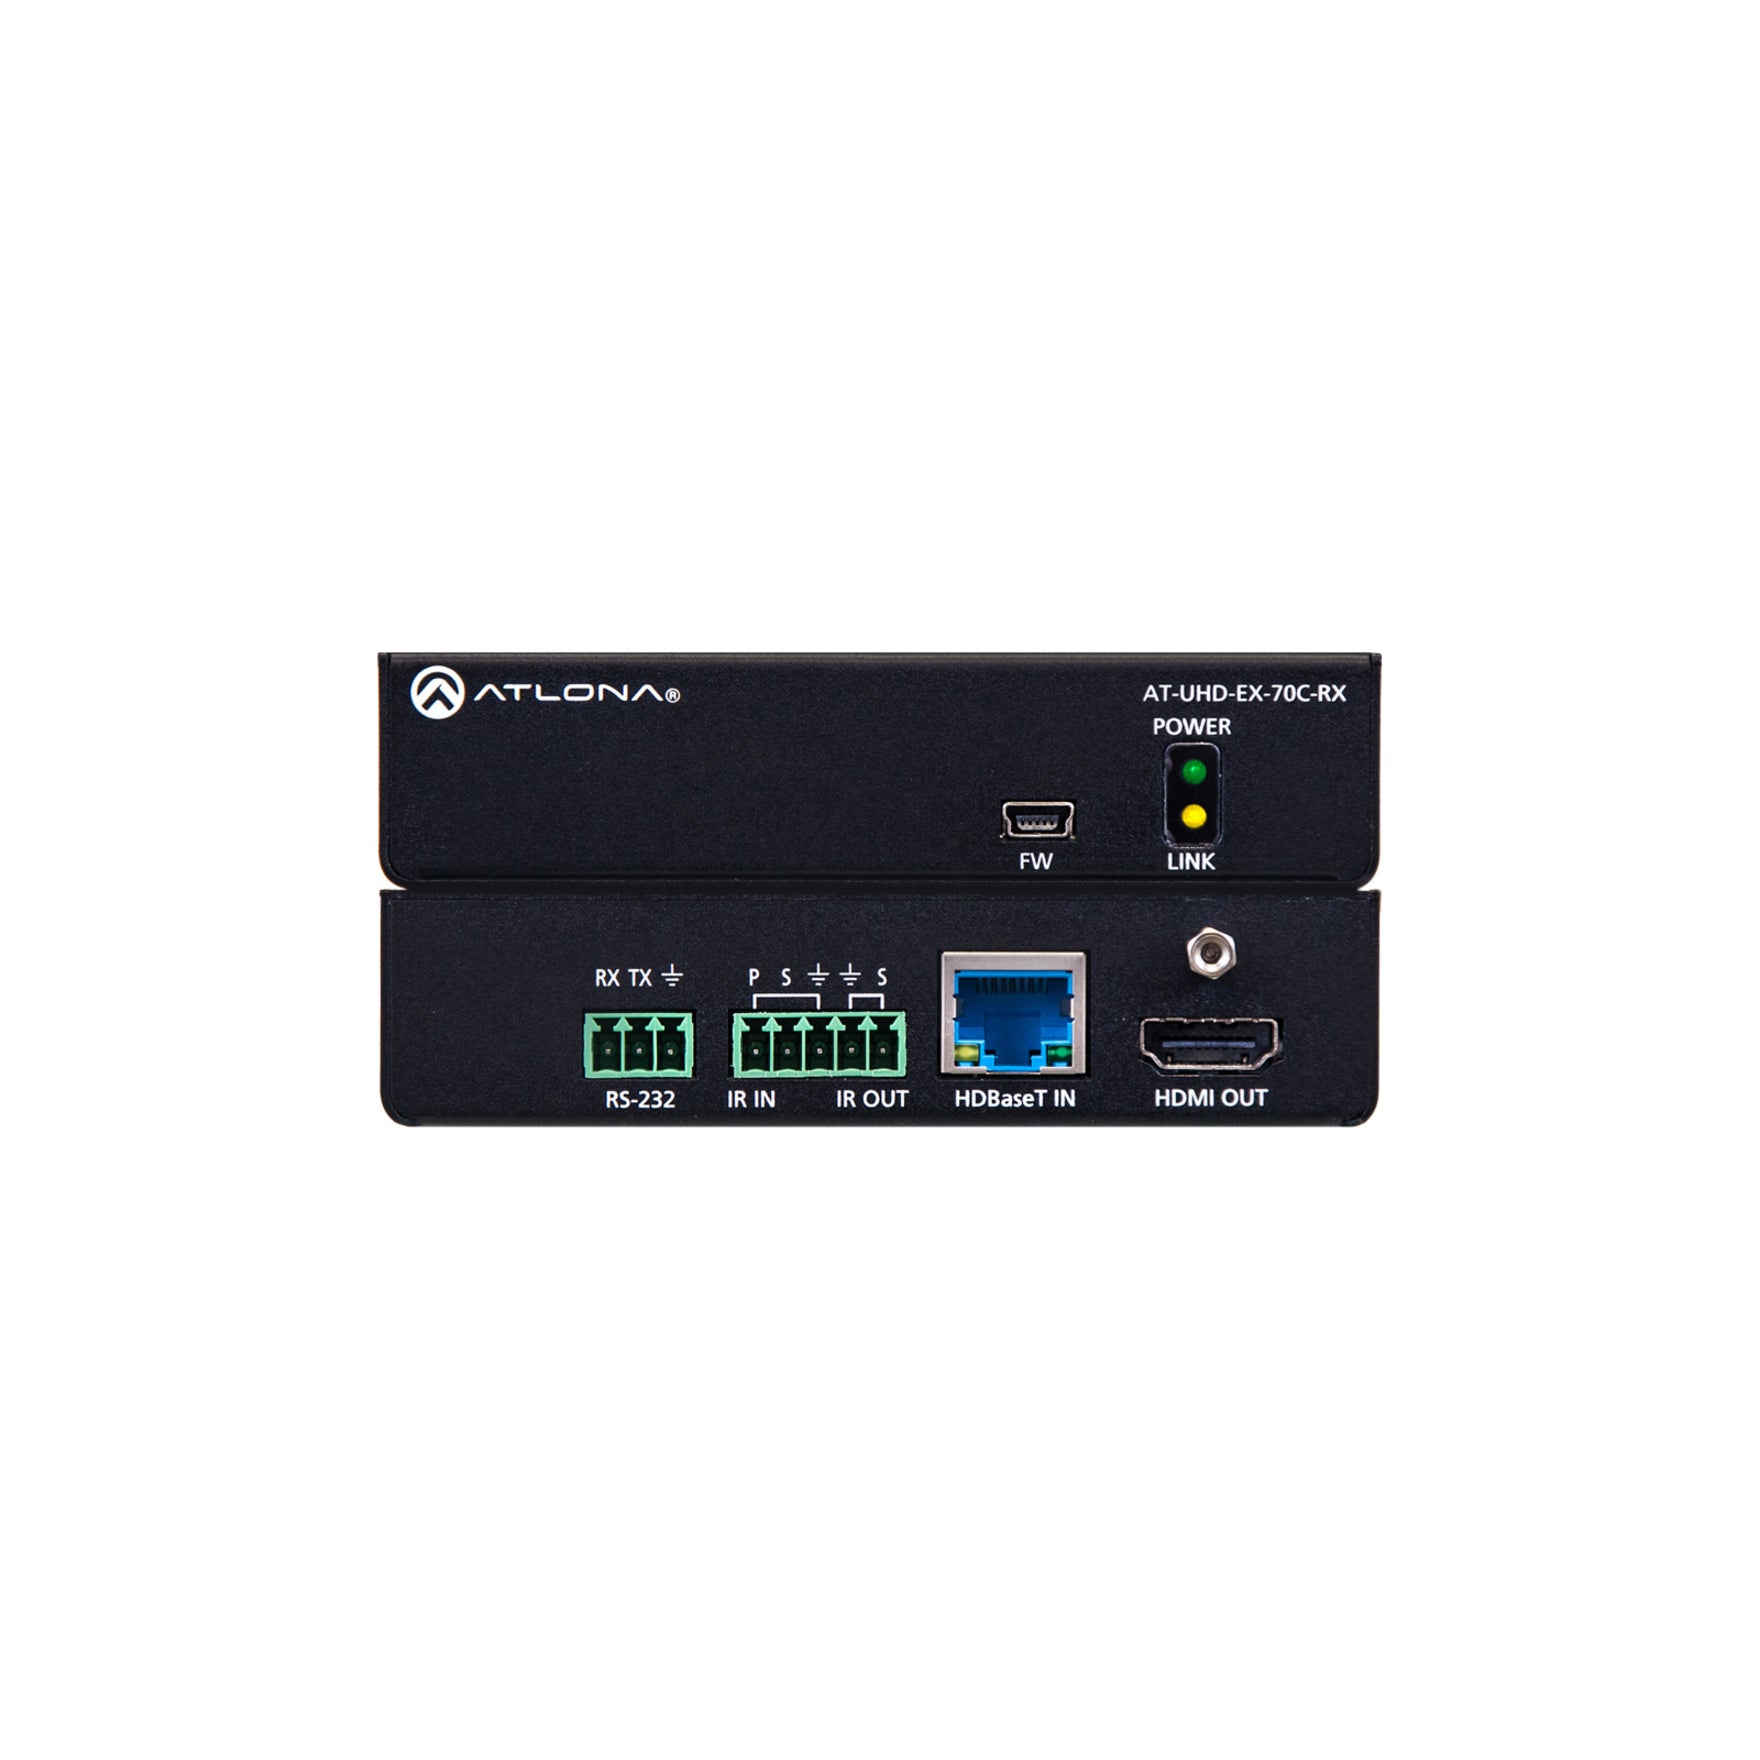 Atlona AT-UHD-EX-70C-RX 4K/UHD HDMI Over HDBaseT Receiver with Control and PoE, 10 Year Warranty, Twisted Pair, Category 7